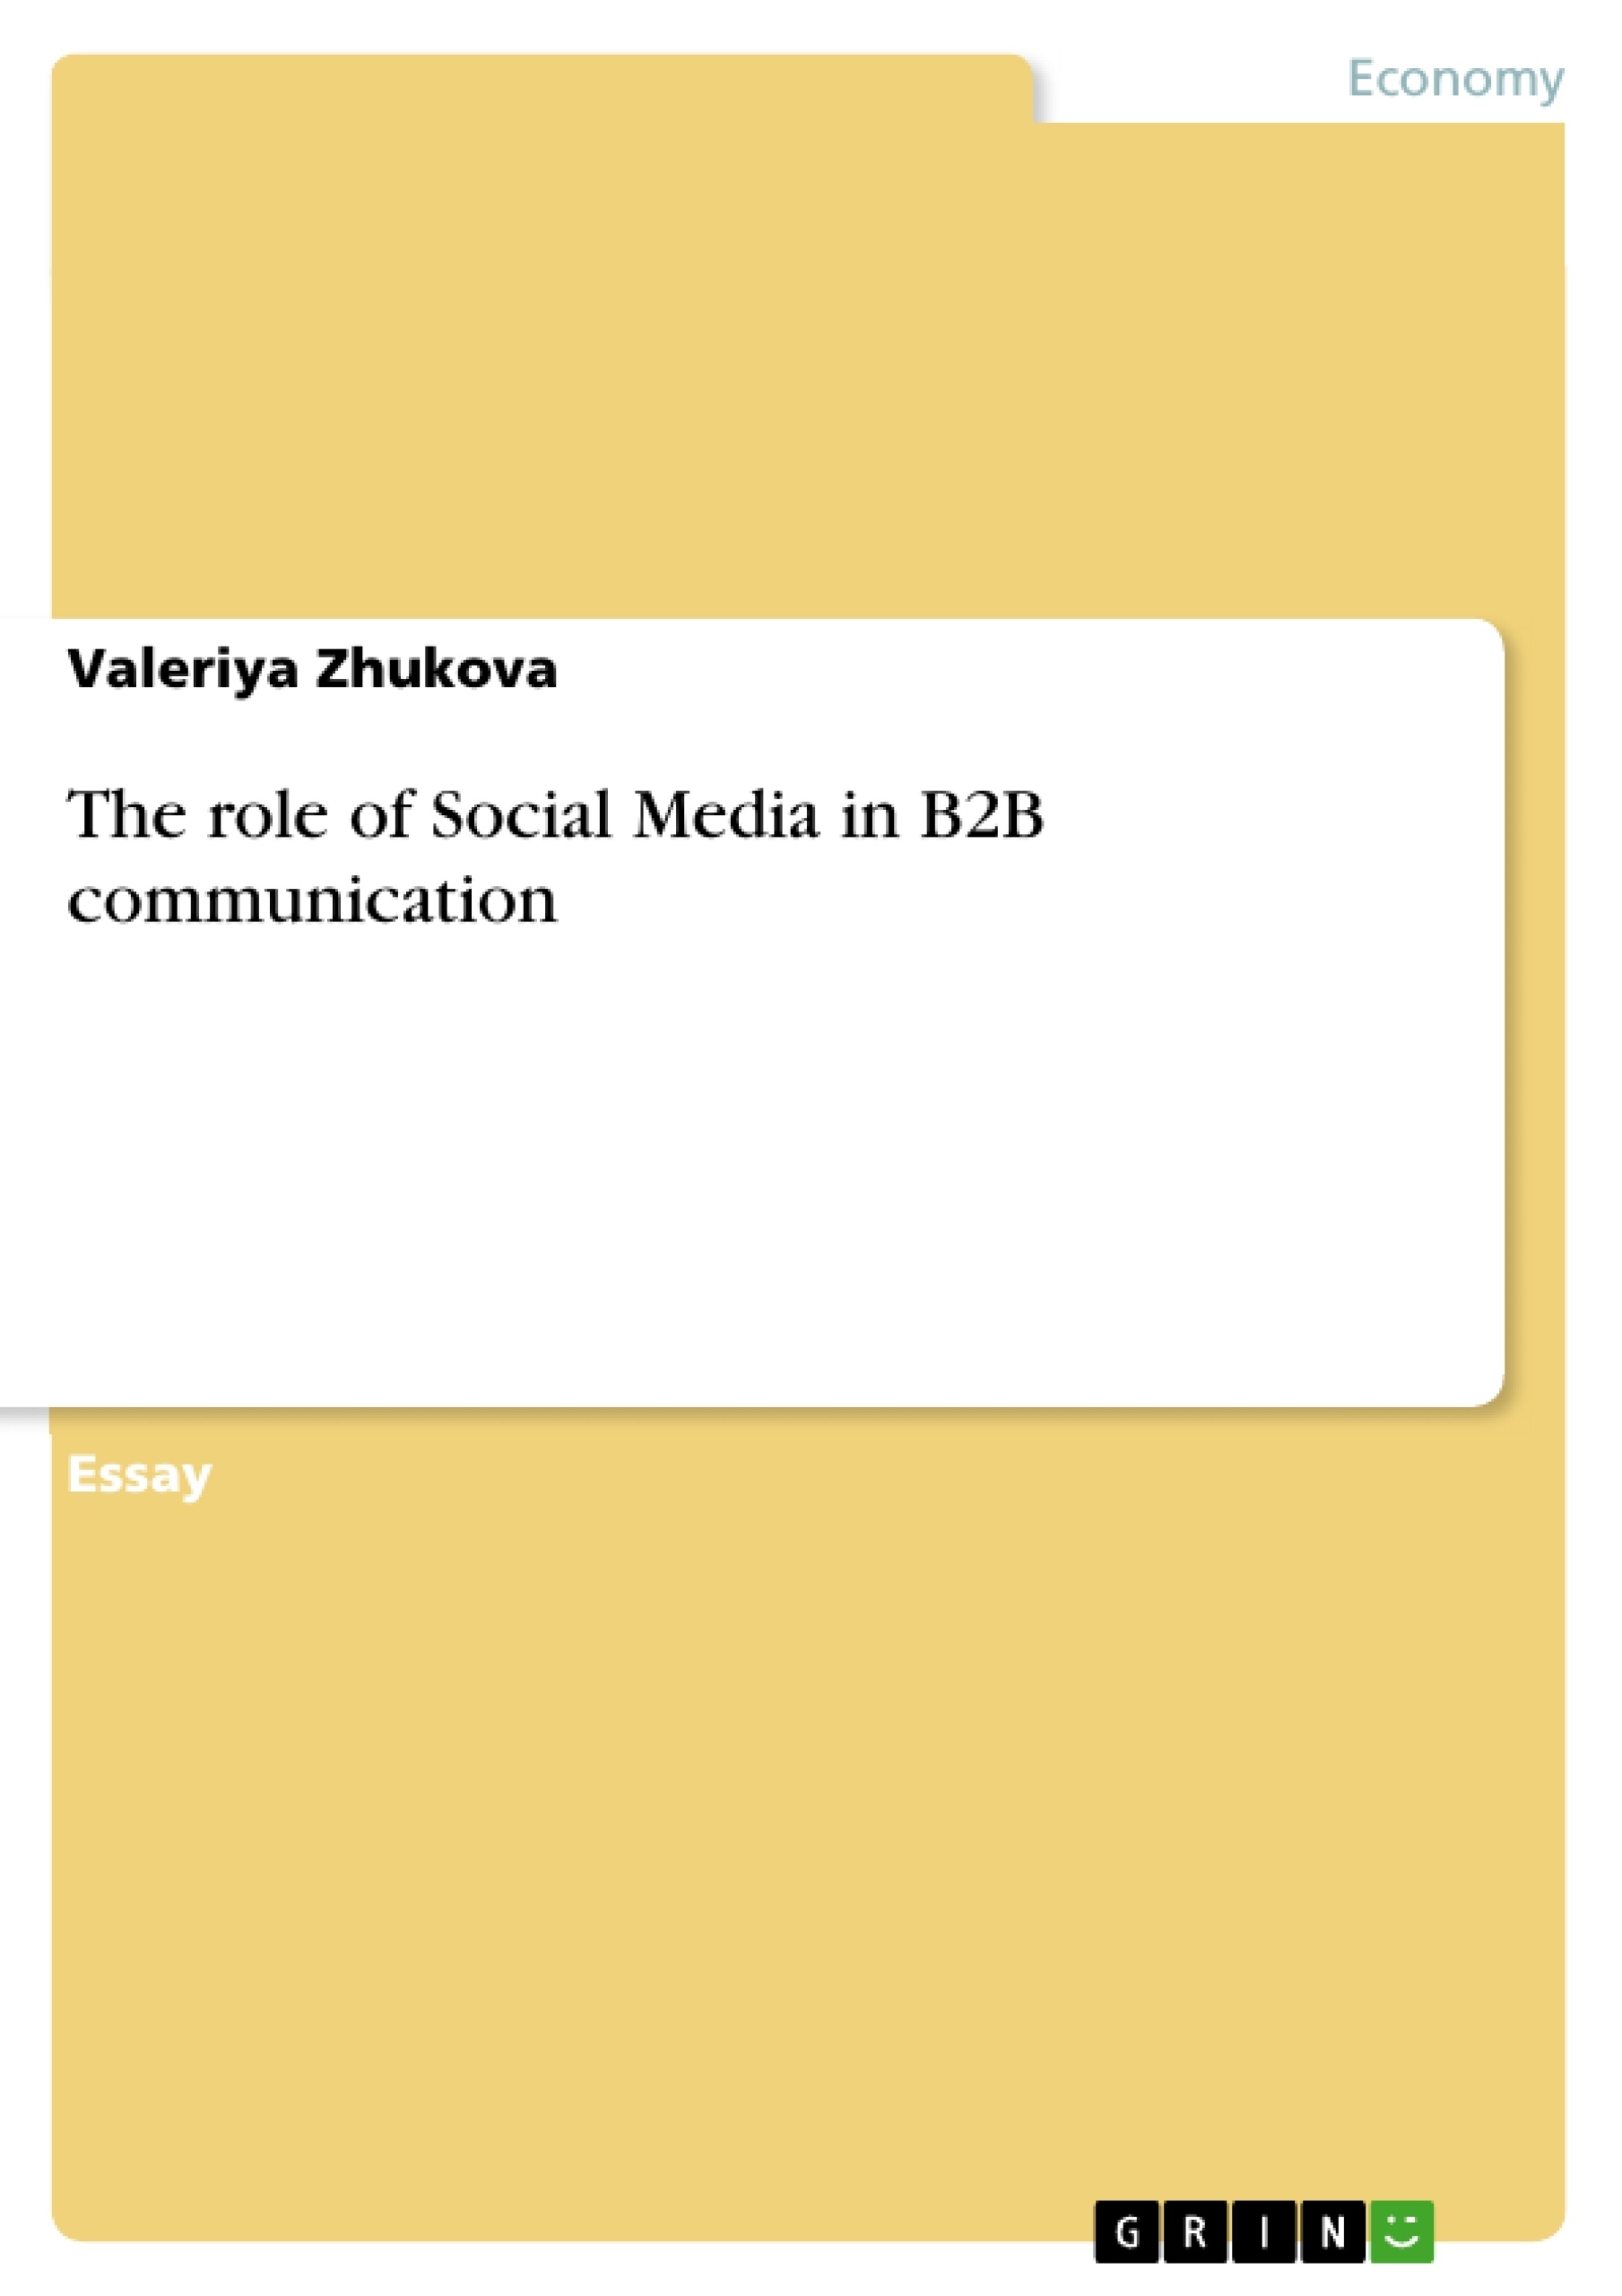 Title: The role of Social Media in B2B communication